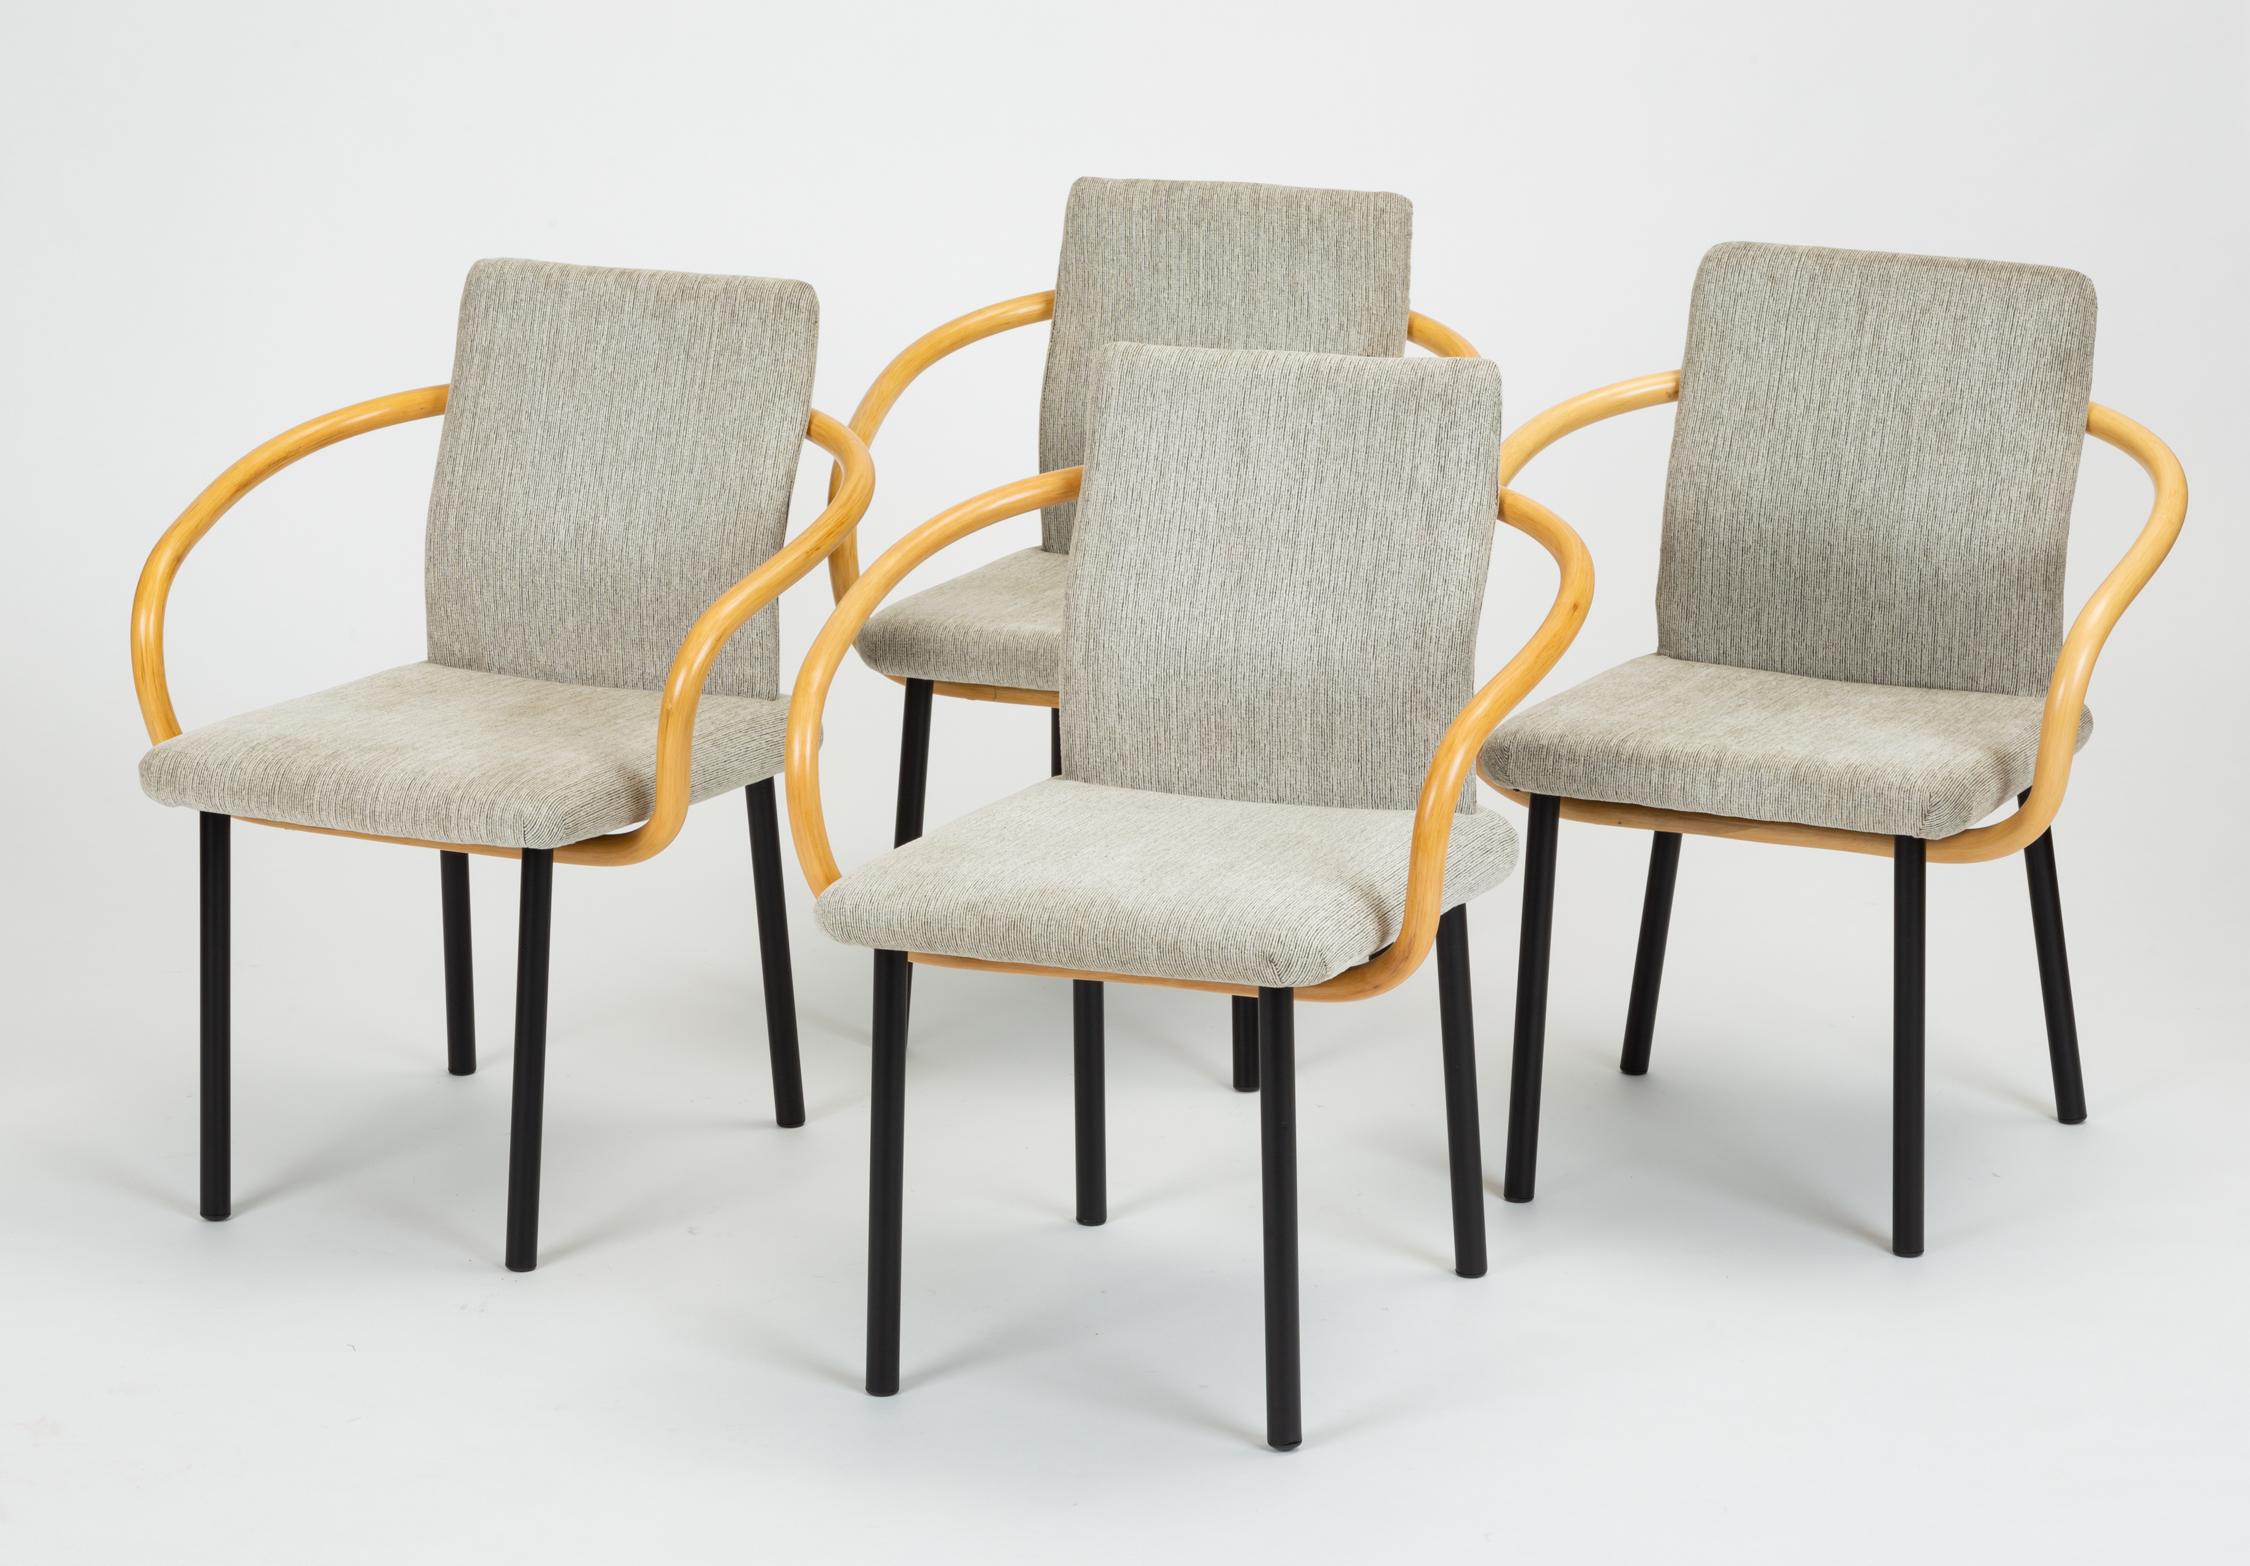 A 1986 design by Ettore Sottsass for Knoll, the Mandarin Chair has a curved back- and armrest, upholstered seat, and four round legs in enameled metal. A slight wave in the backrest gives it an ergonomic swell. The chair plays equally to Sottsass’